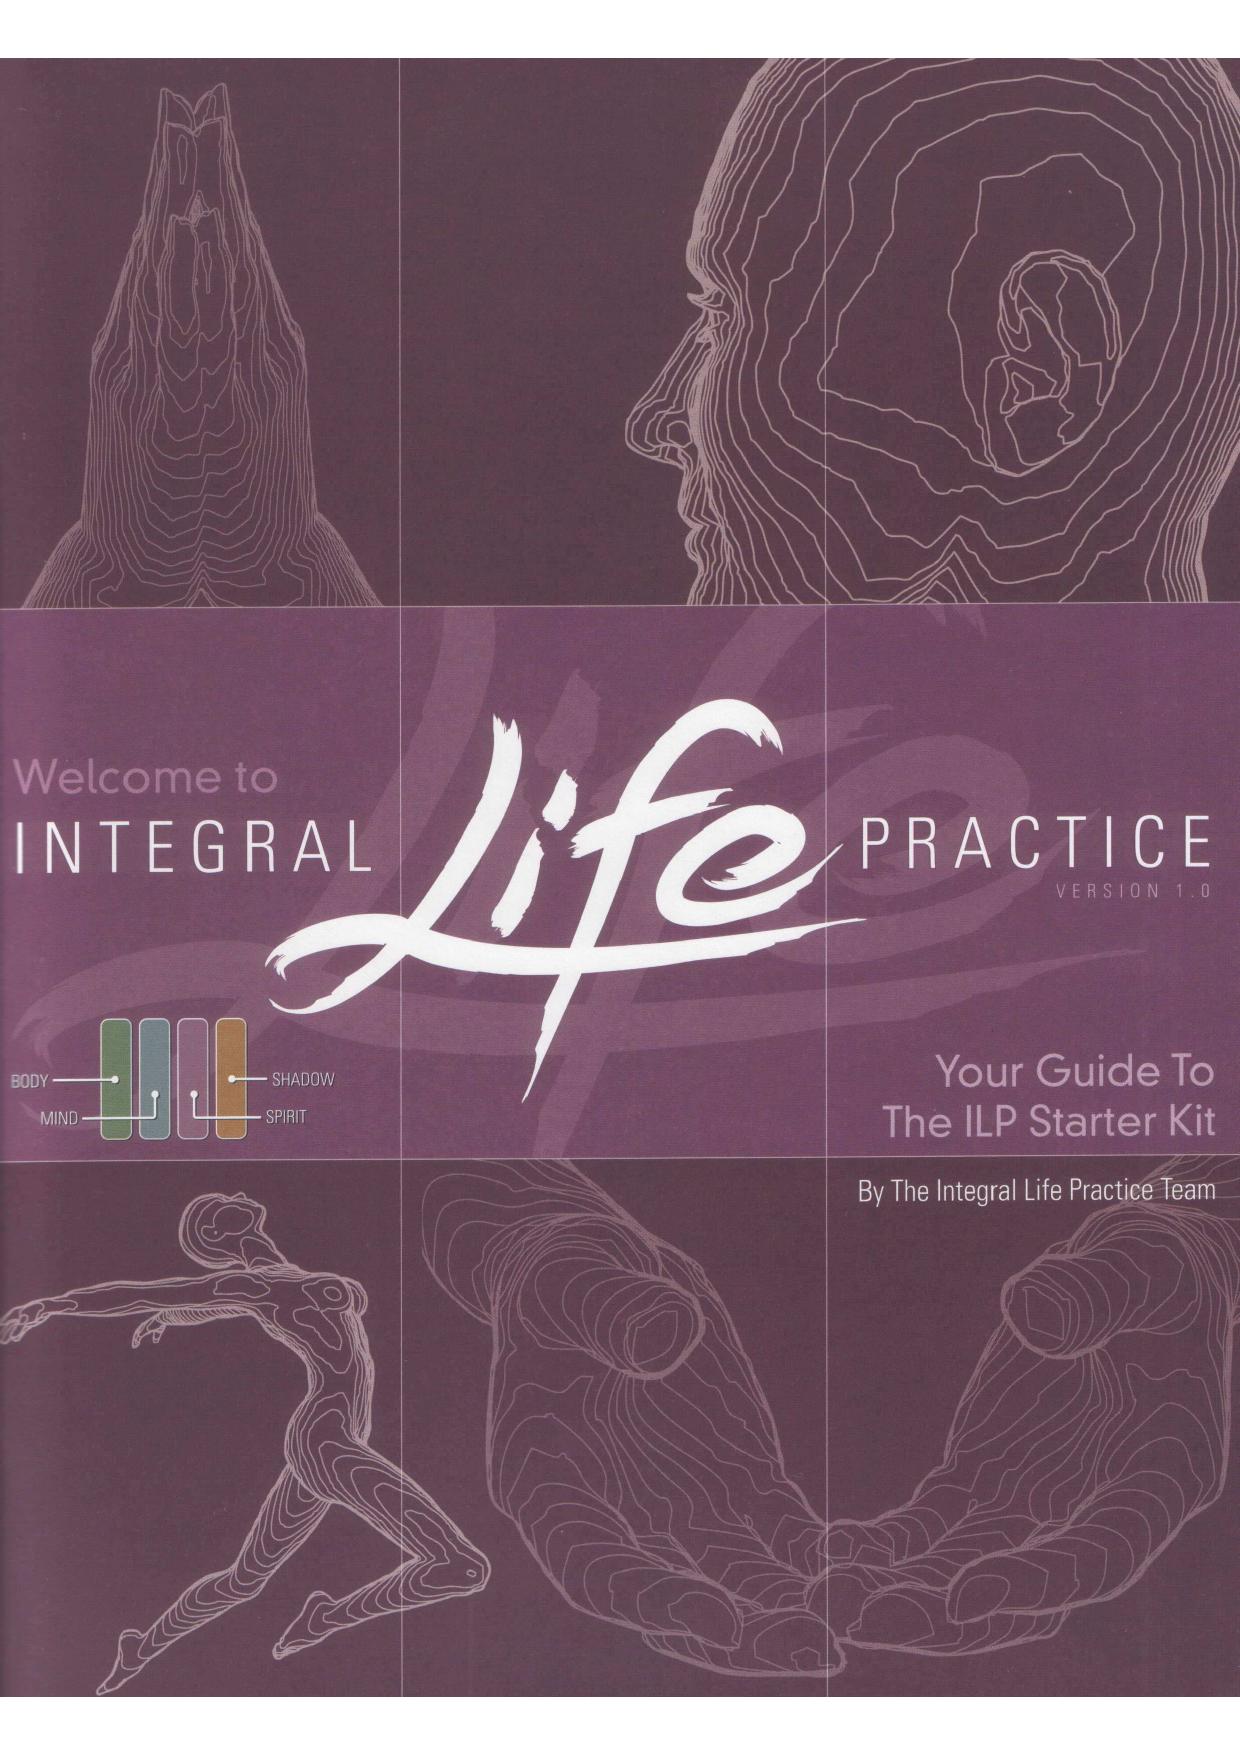 Welcome to Integral Life Practice